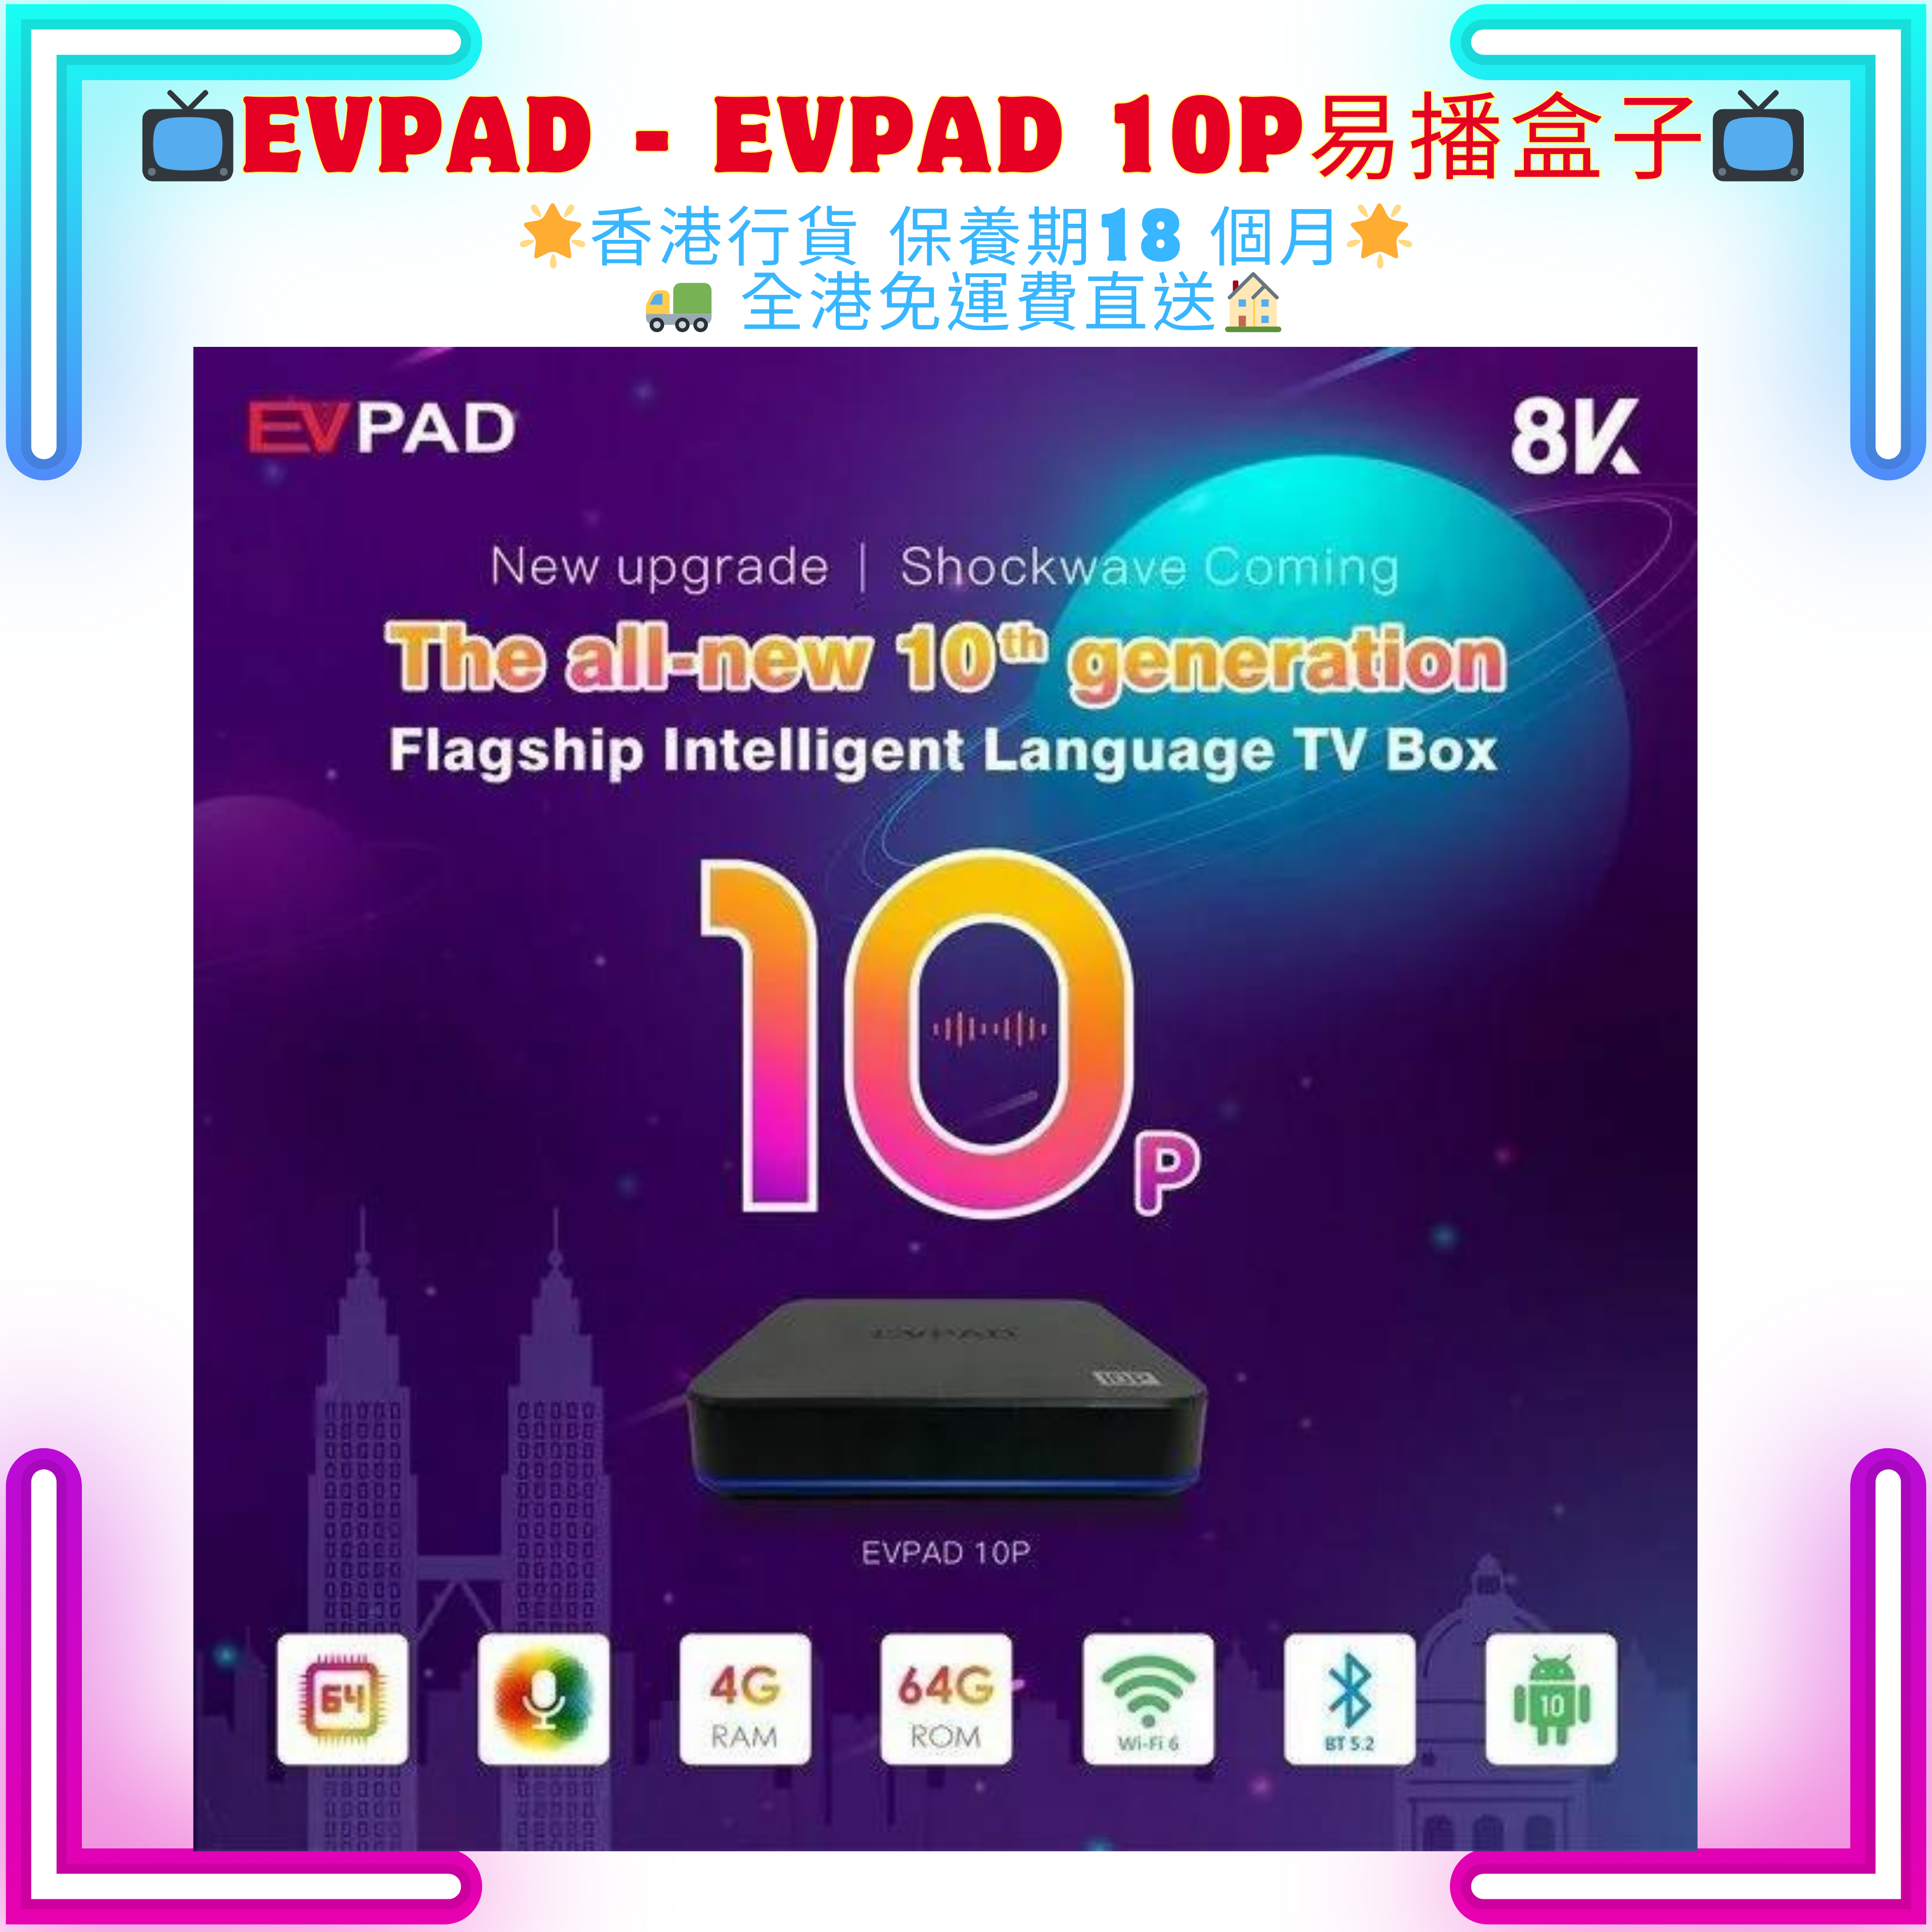 EVPAD 10P 4+64GB 8K ANDROID BOX flagship smart easy-to-play box licensed in Hong Kong